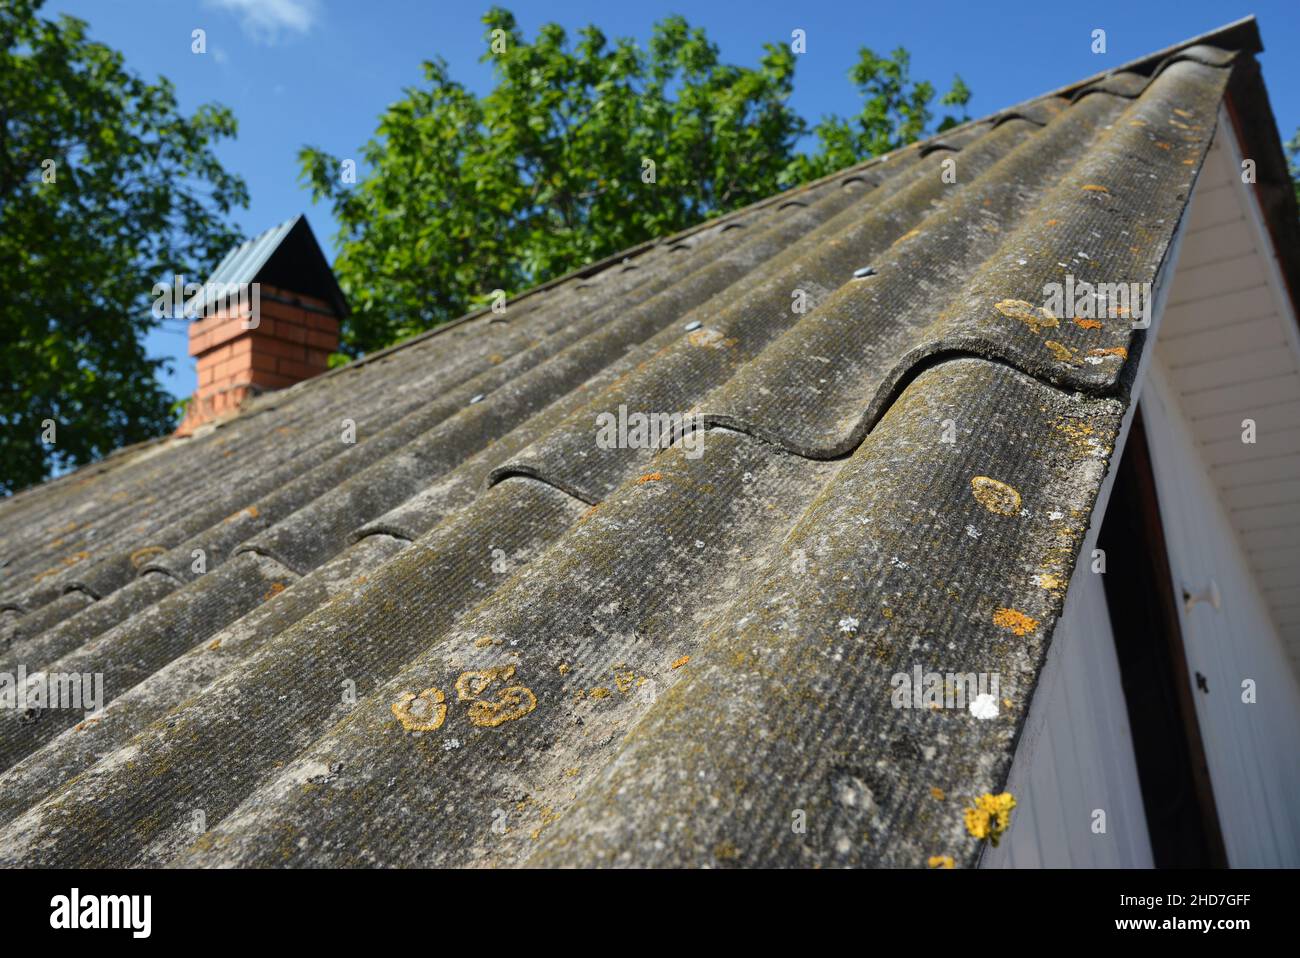 An old asbestos pitched roof. A close-up of an old asbestos roof tiles covered with moss and lichen. Stock Photo